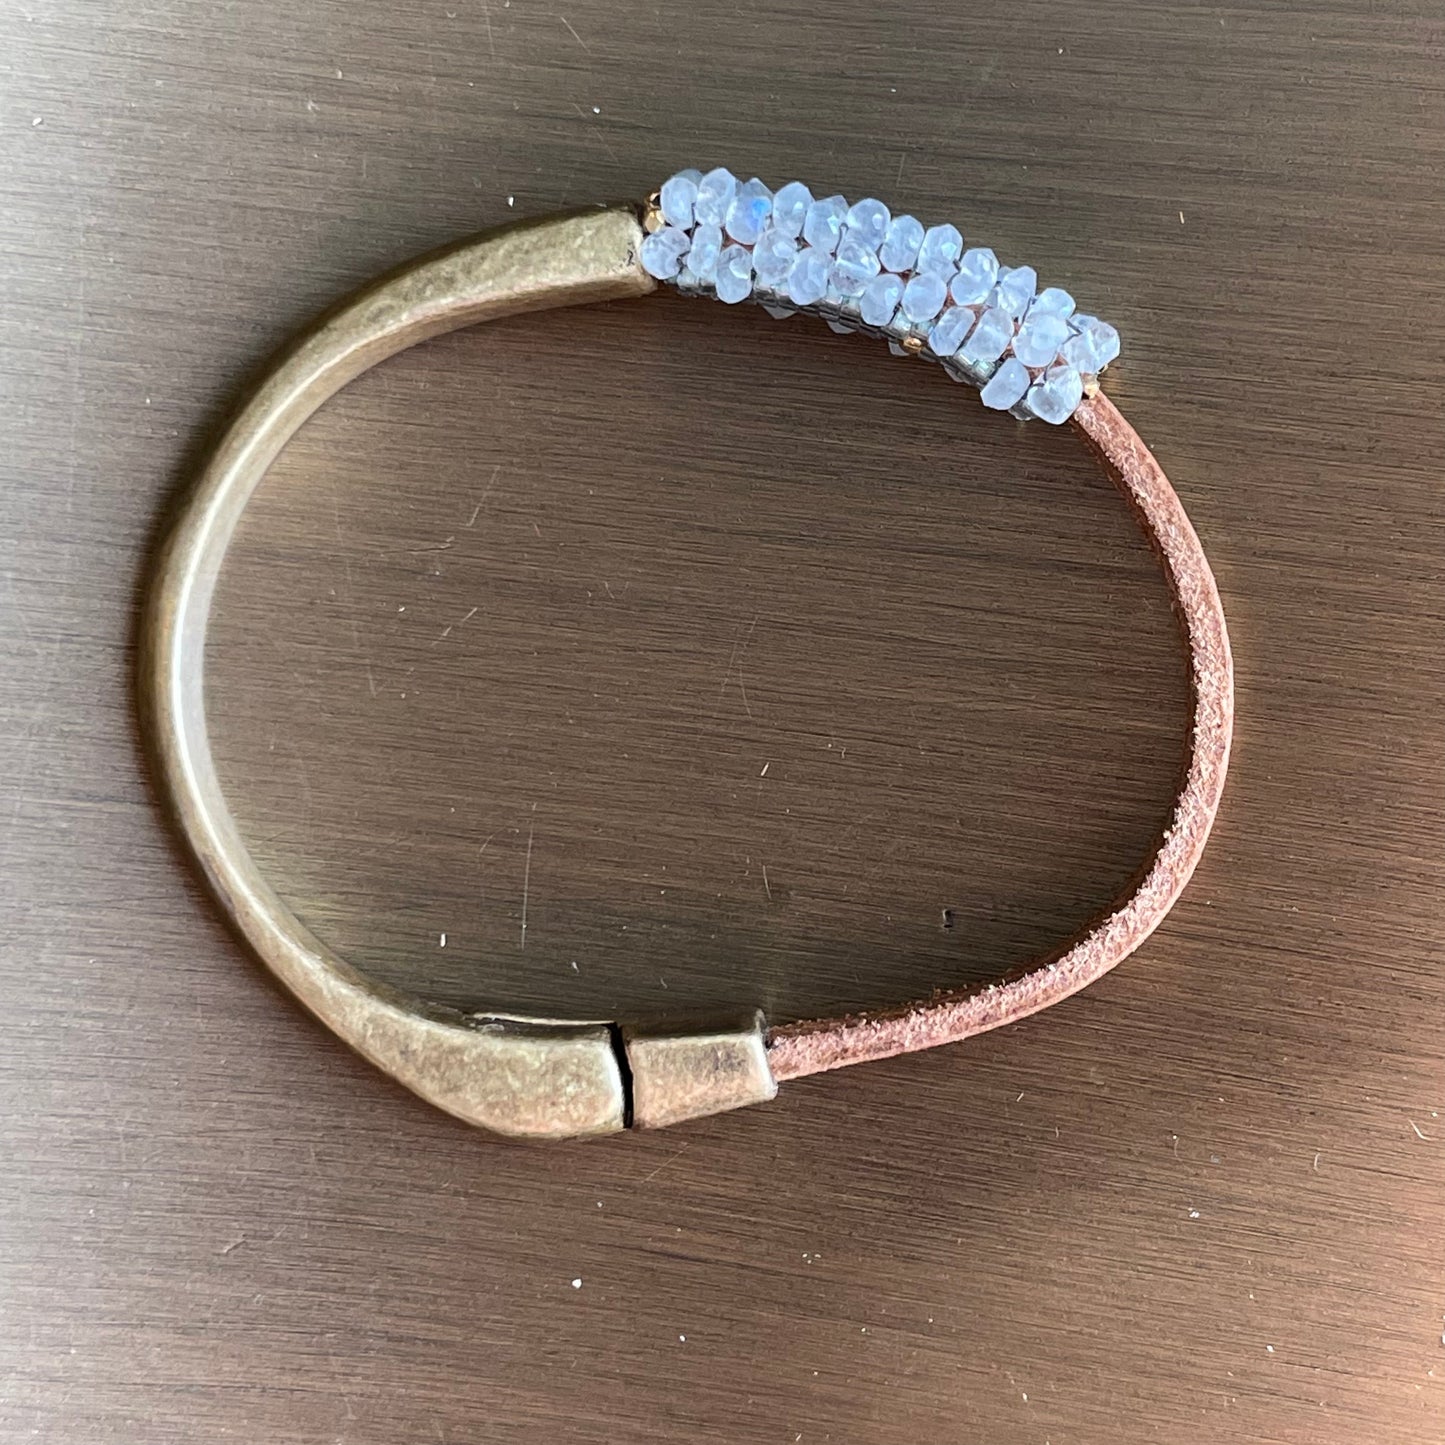 Moonstone and leather bracelet